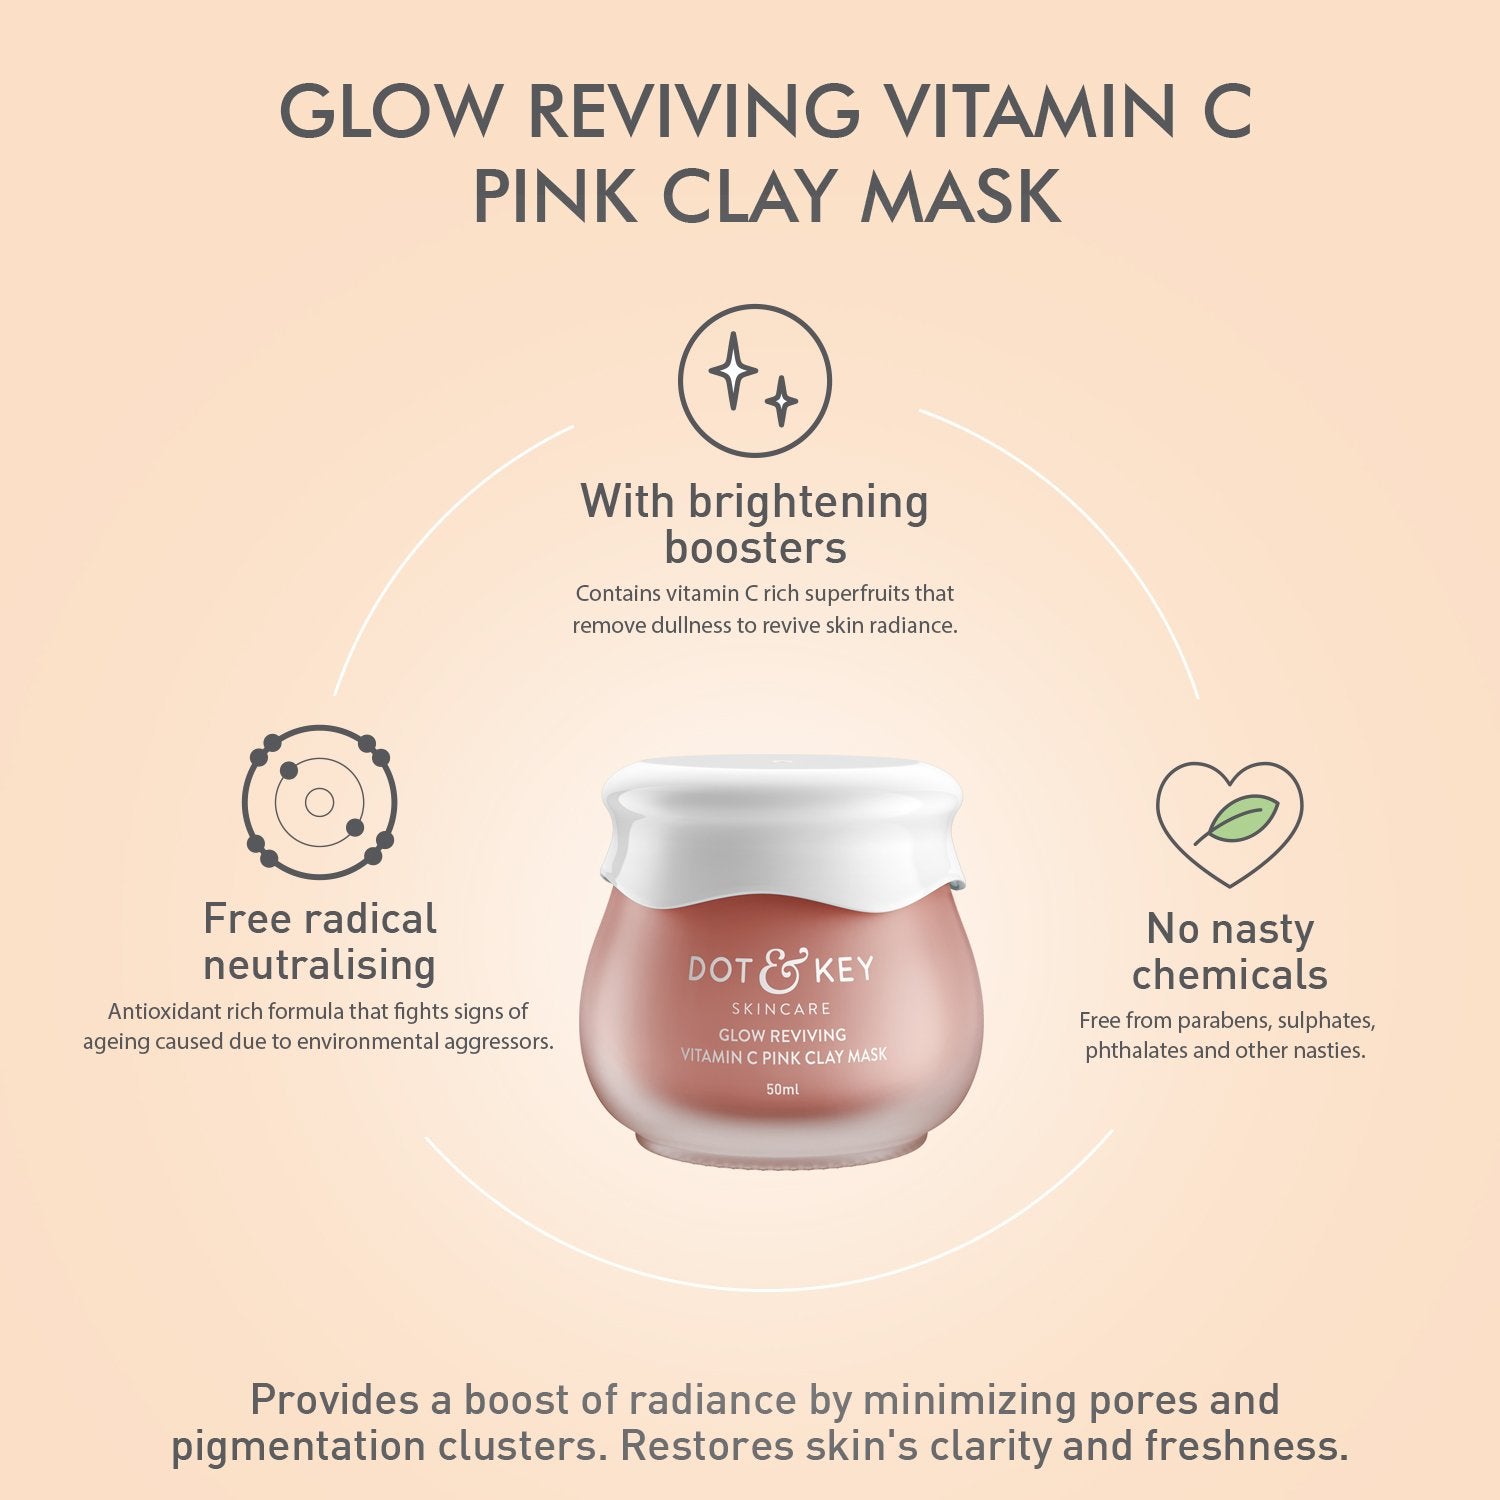 Shop Dot & Key Glow Reviving Vitamin C Pink Clay Mask on Sublime Life. Gently Deep Cleanses and Nourishes Skin.